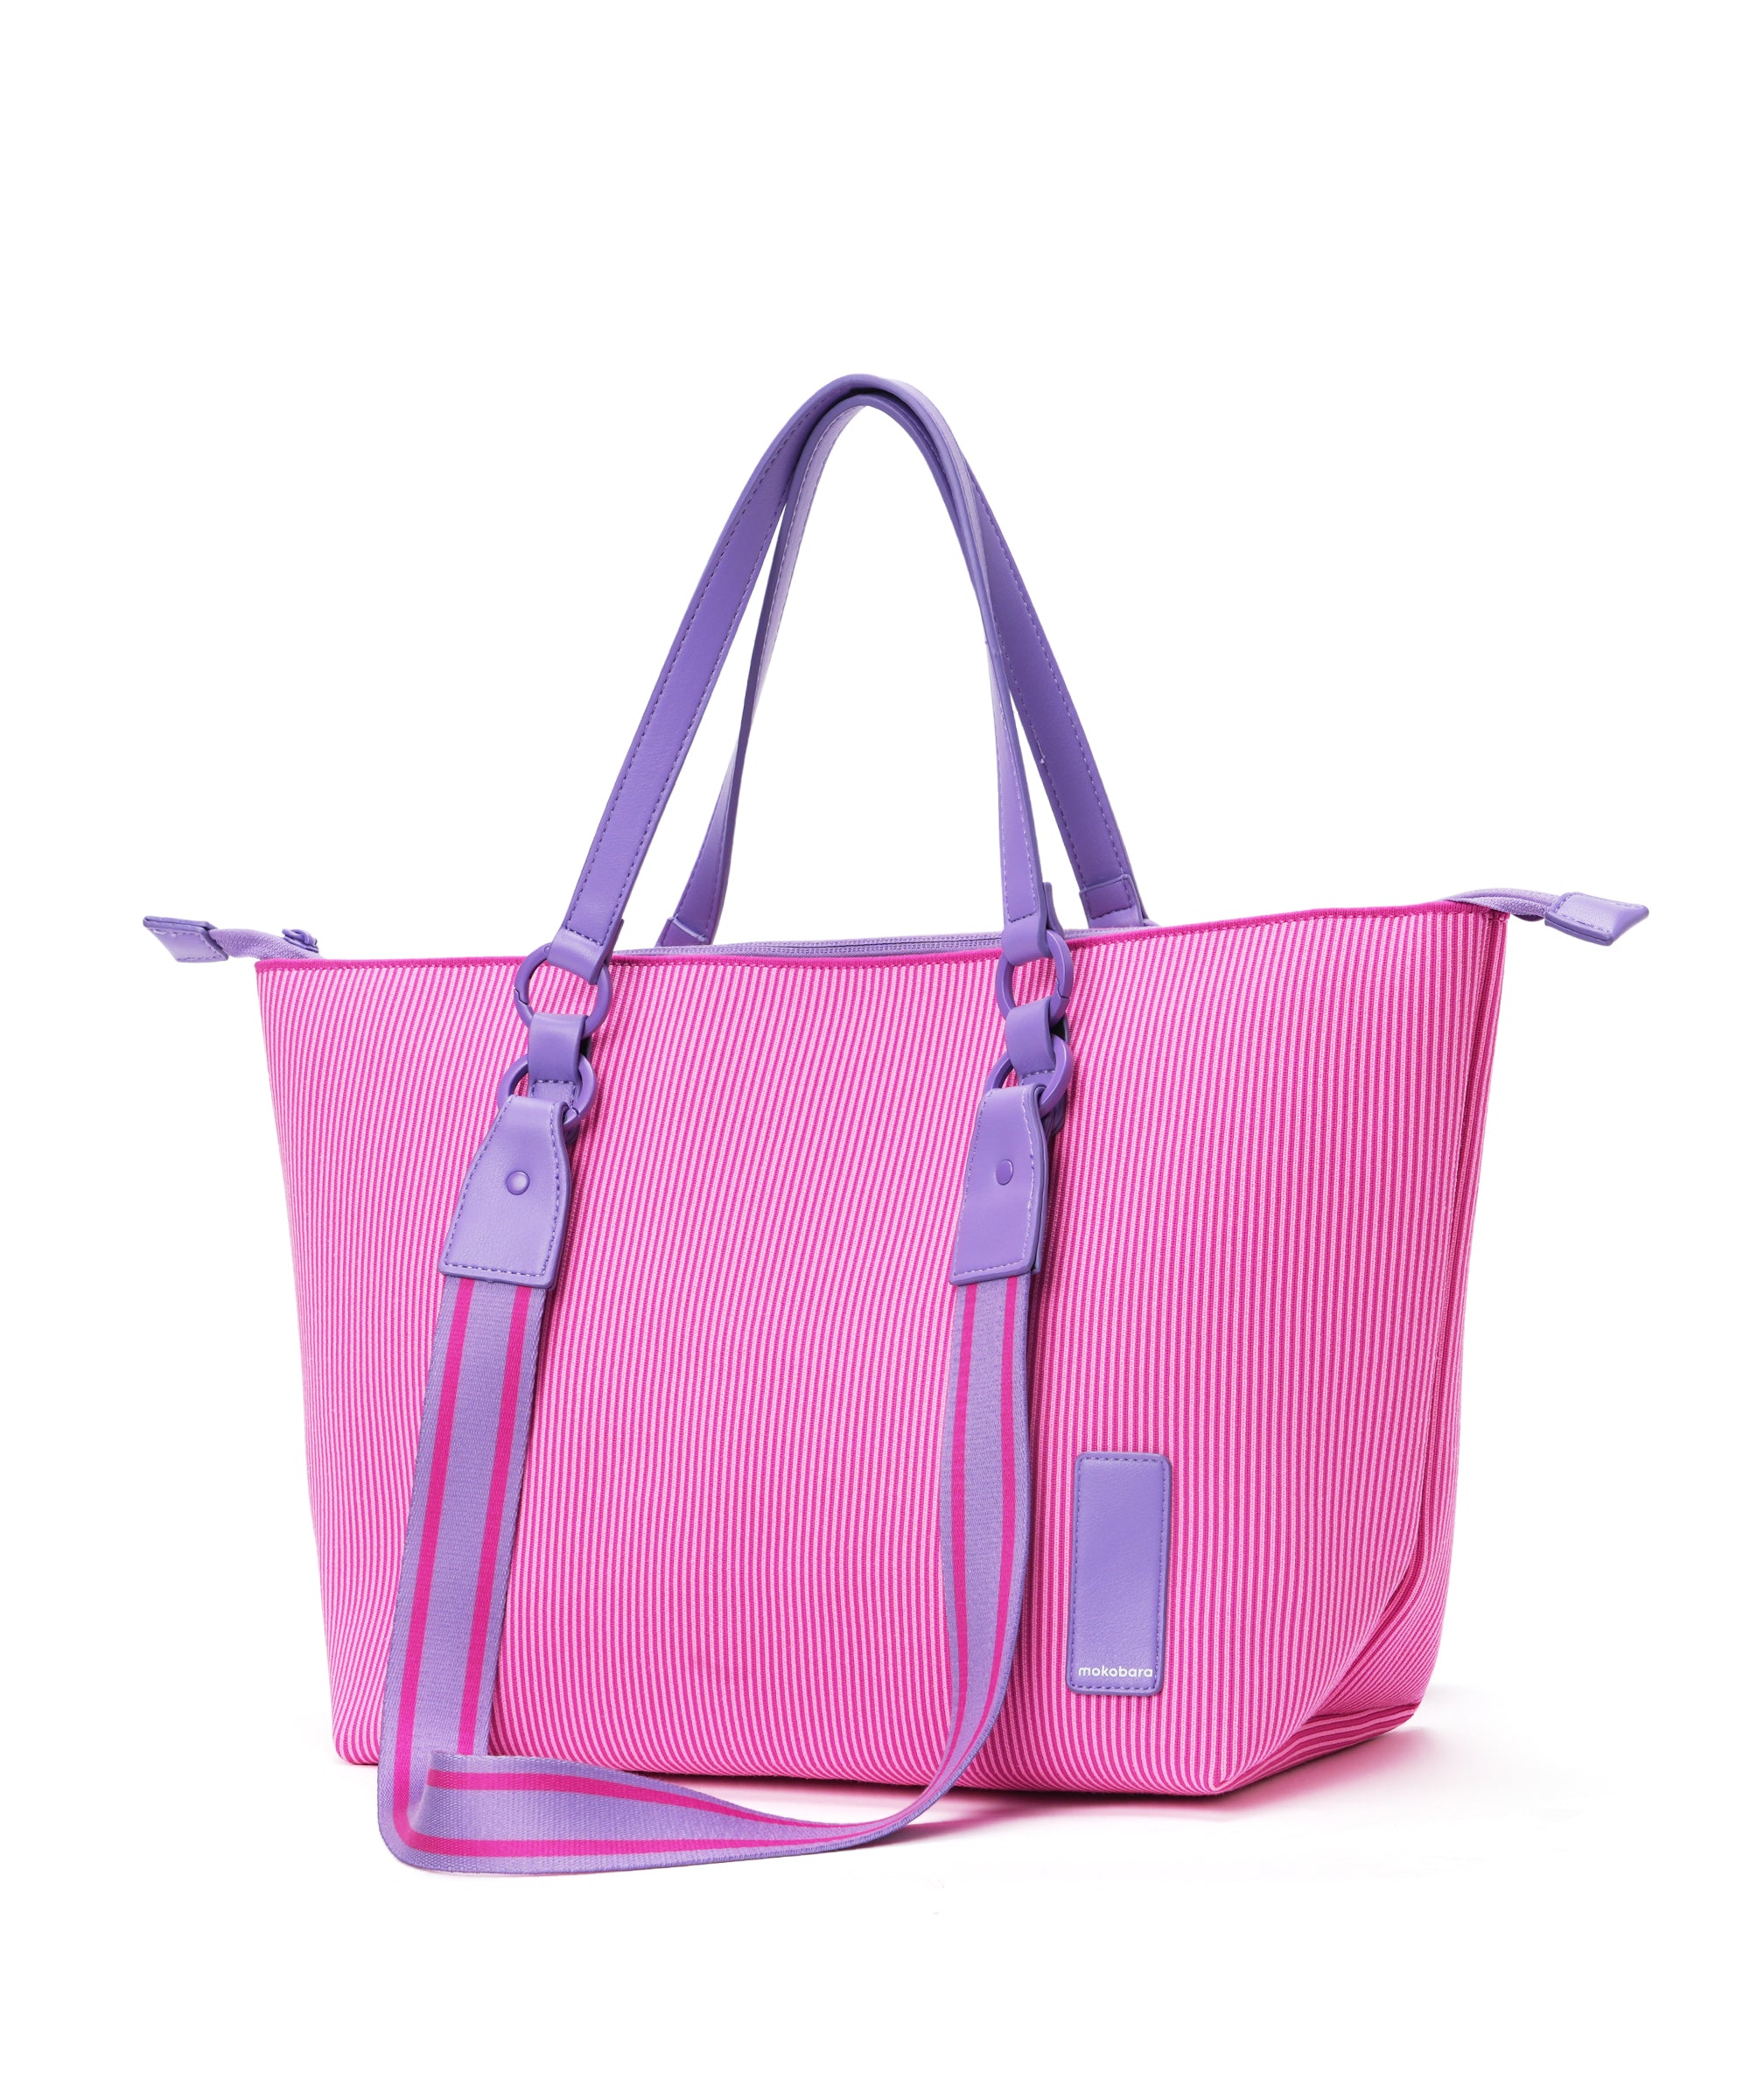 Color_Very Berry | The XOXO Daily Tote